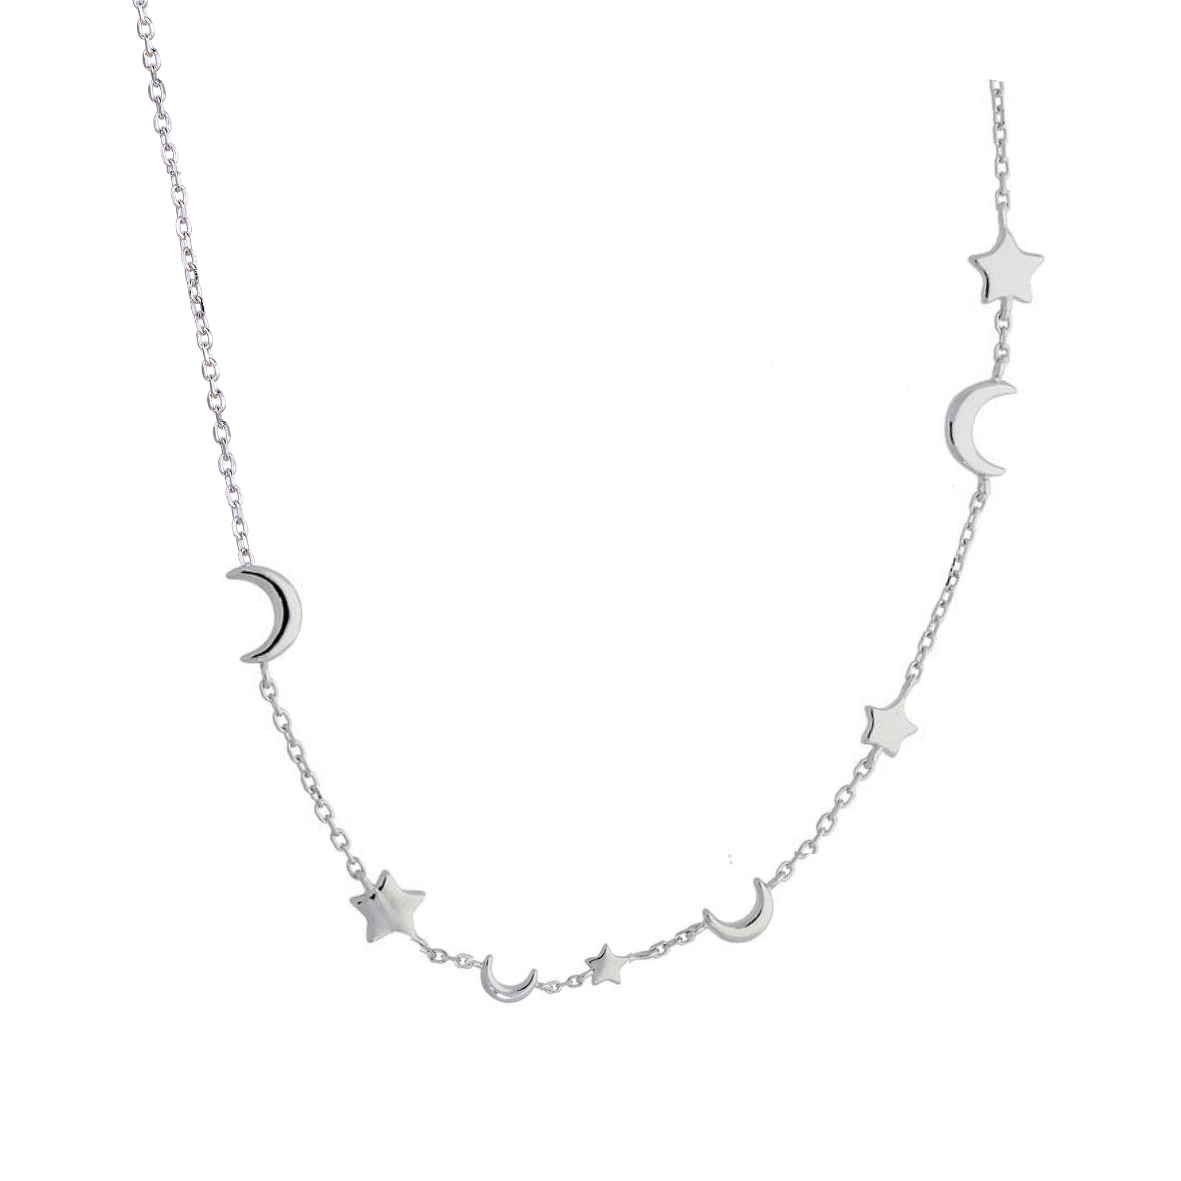 Stars and Moon Necklace